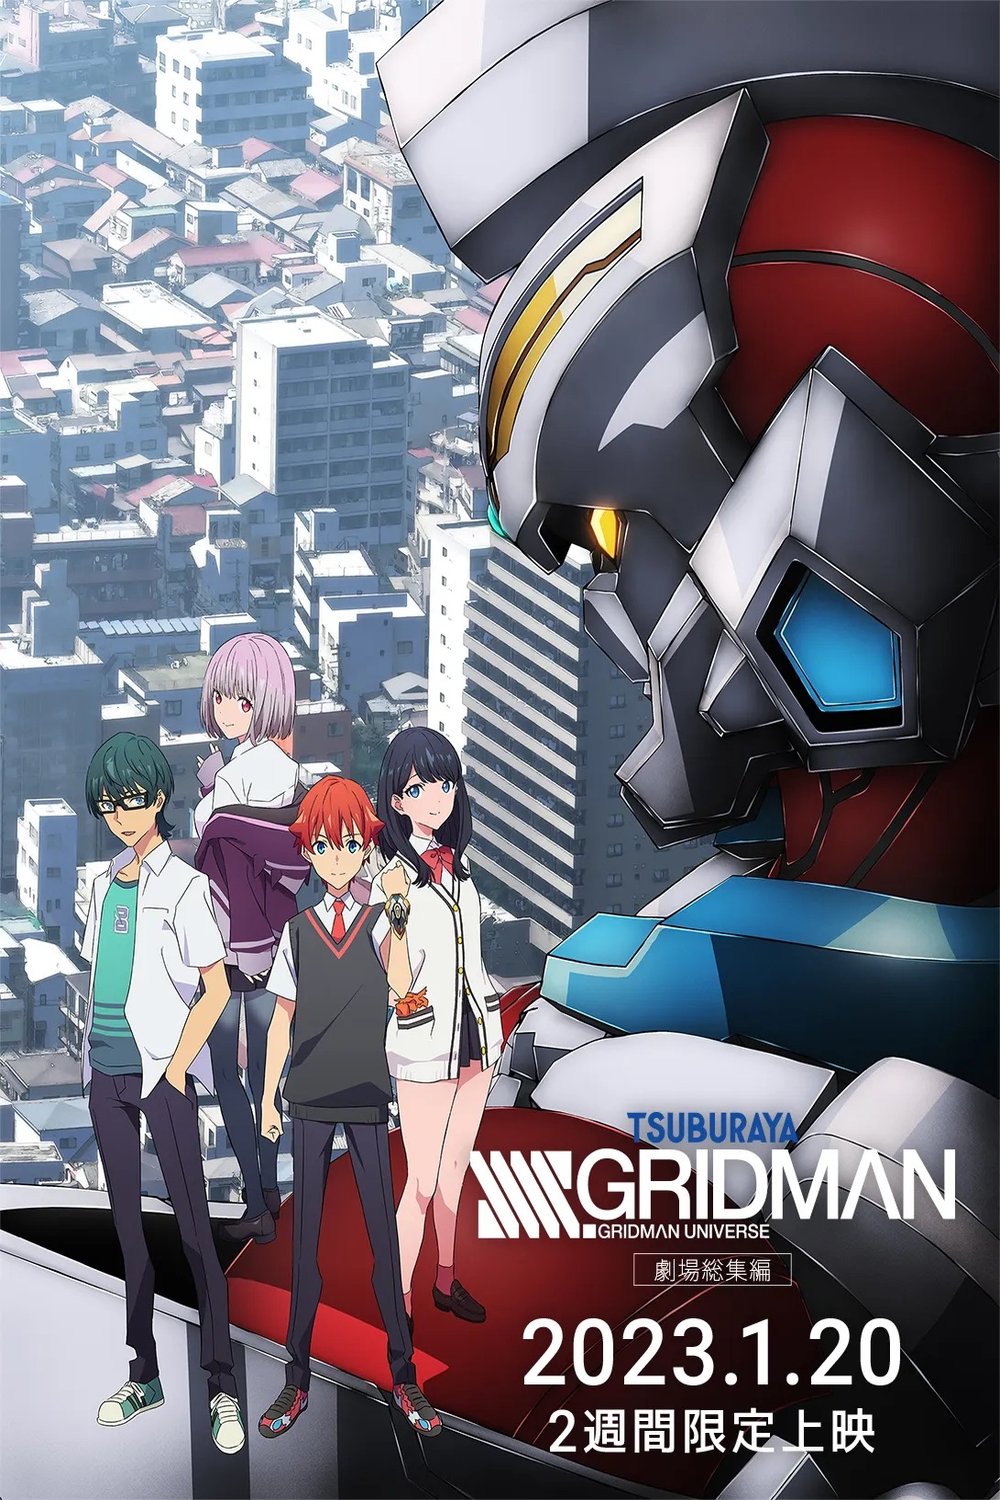 Japanese poster of the movie SSSS.Gridman